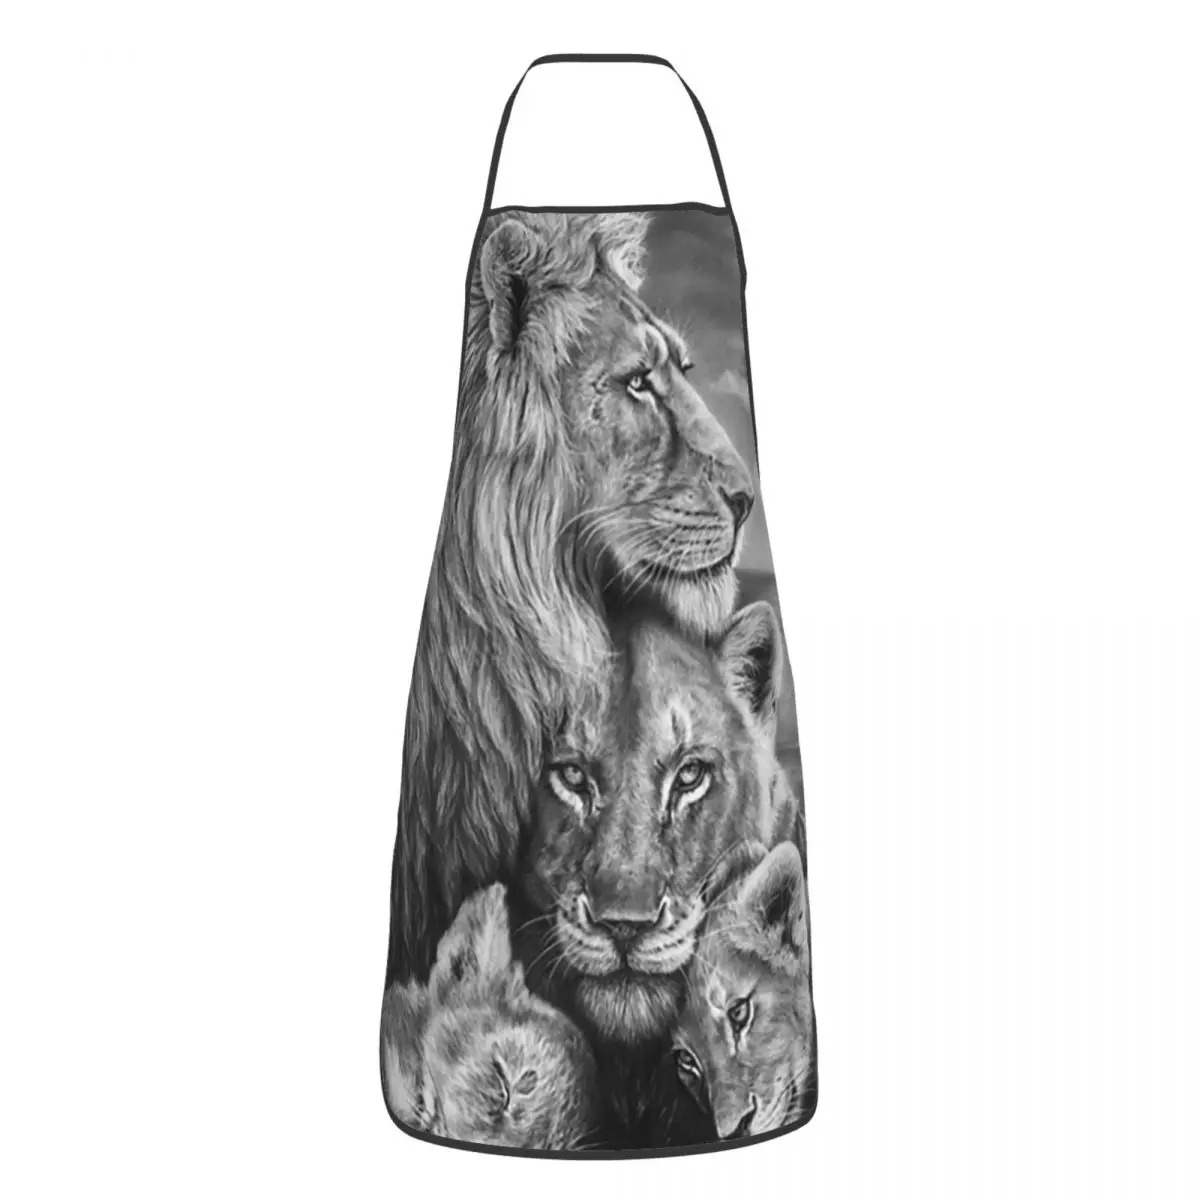 

Lion Family Apron Cuisine Cooking Baking Household Cleaning Gardening Animal Cartoon Bibs Cafe Printed Tablier Adult